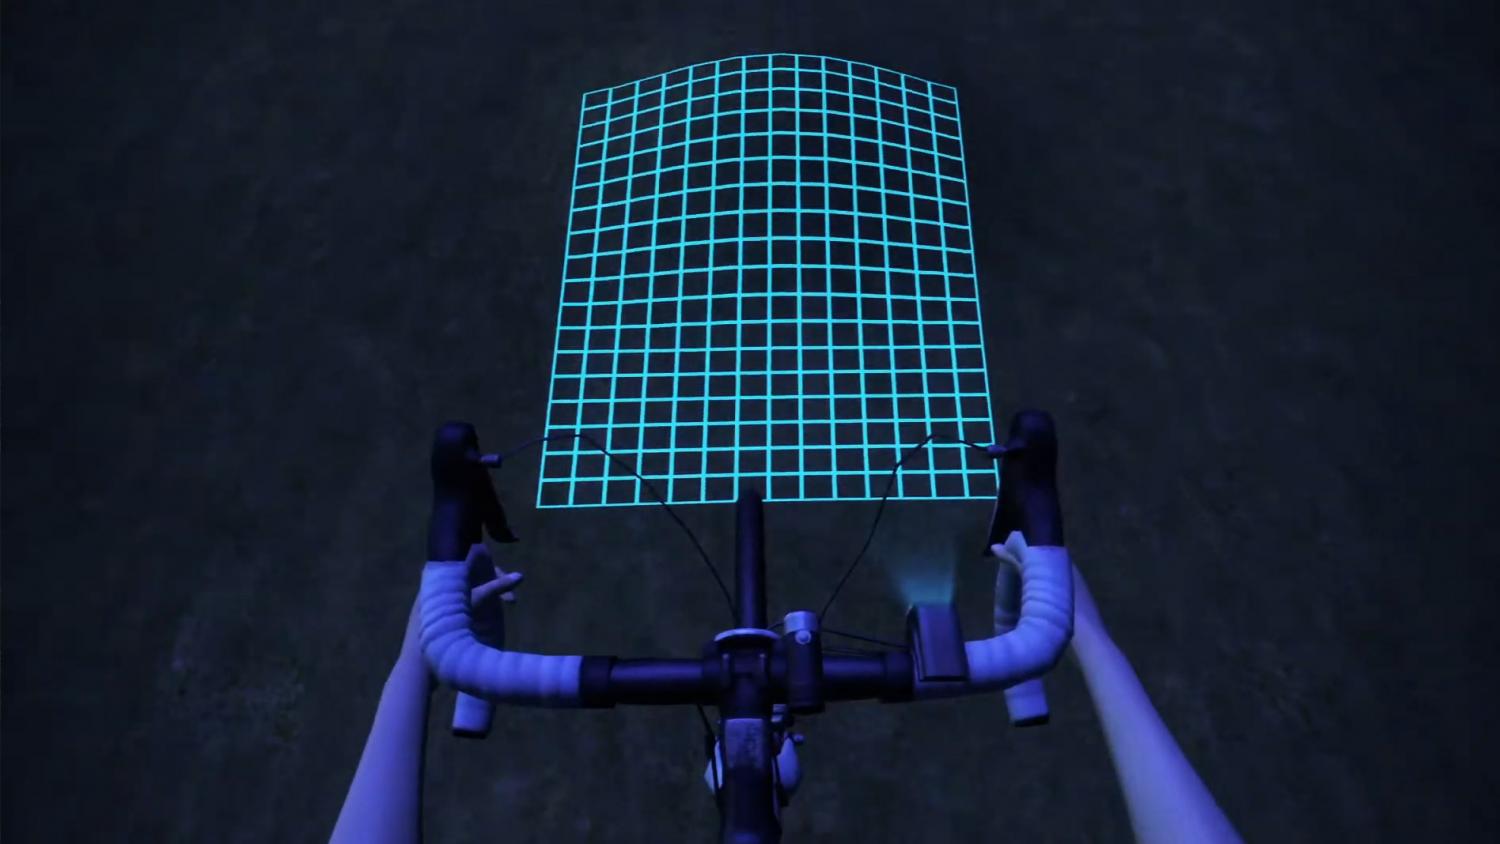 Lumigrids bicycle grid projection light - Projecting laser grid for night bicycle riding safety